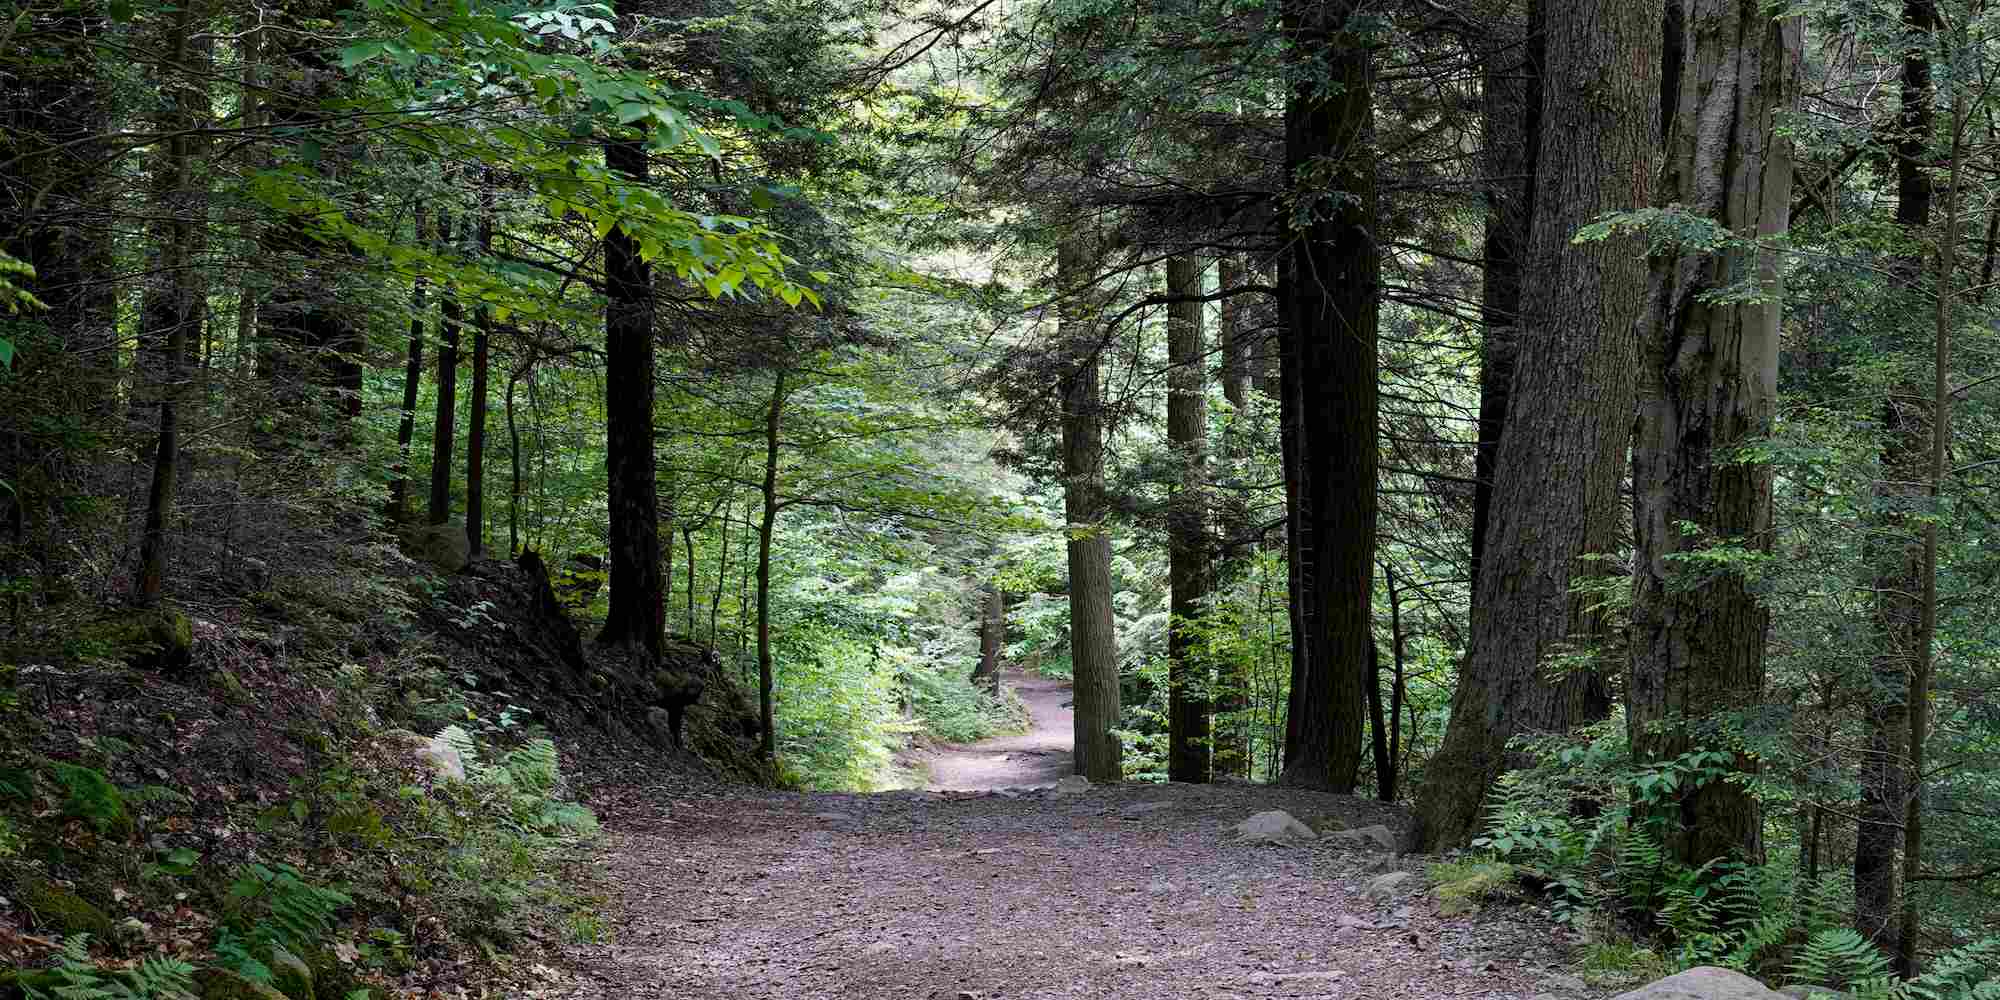 A hiking trail surrounded by trees and shade